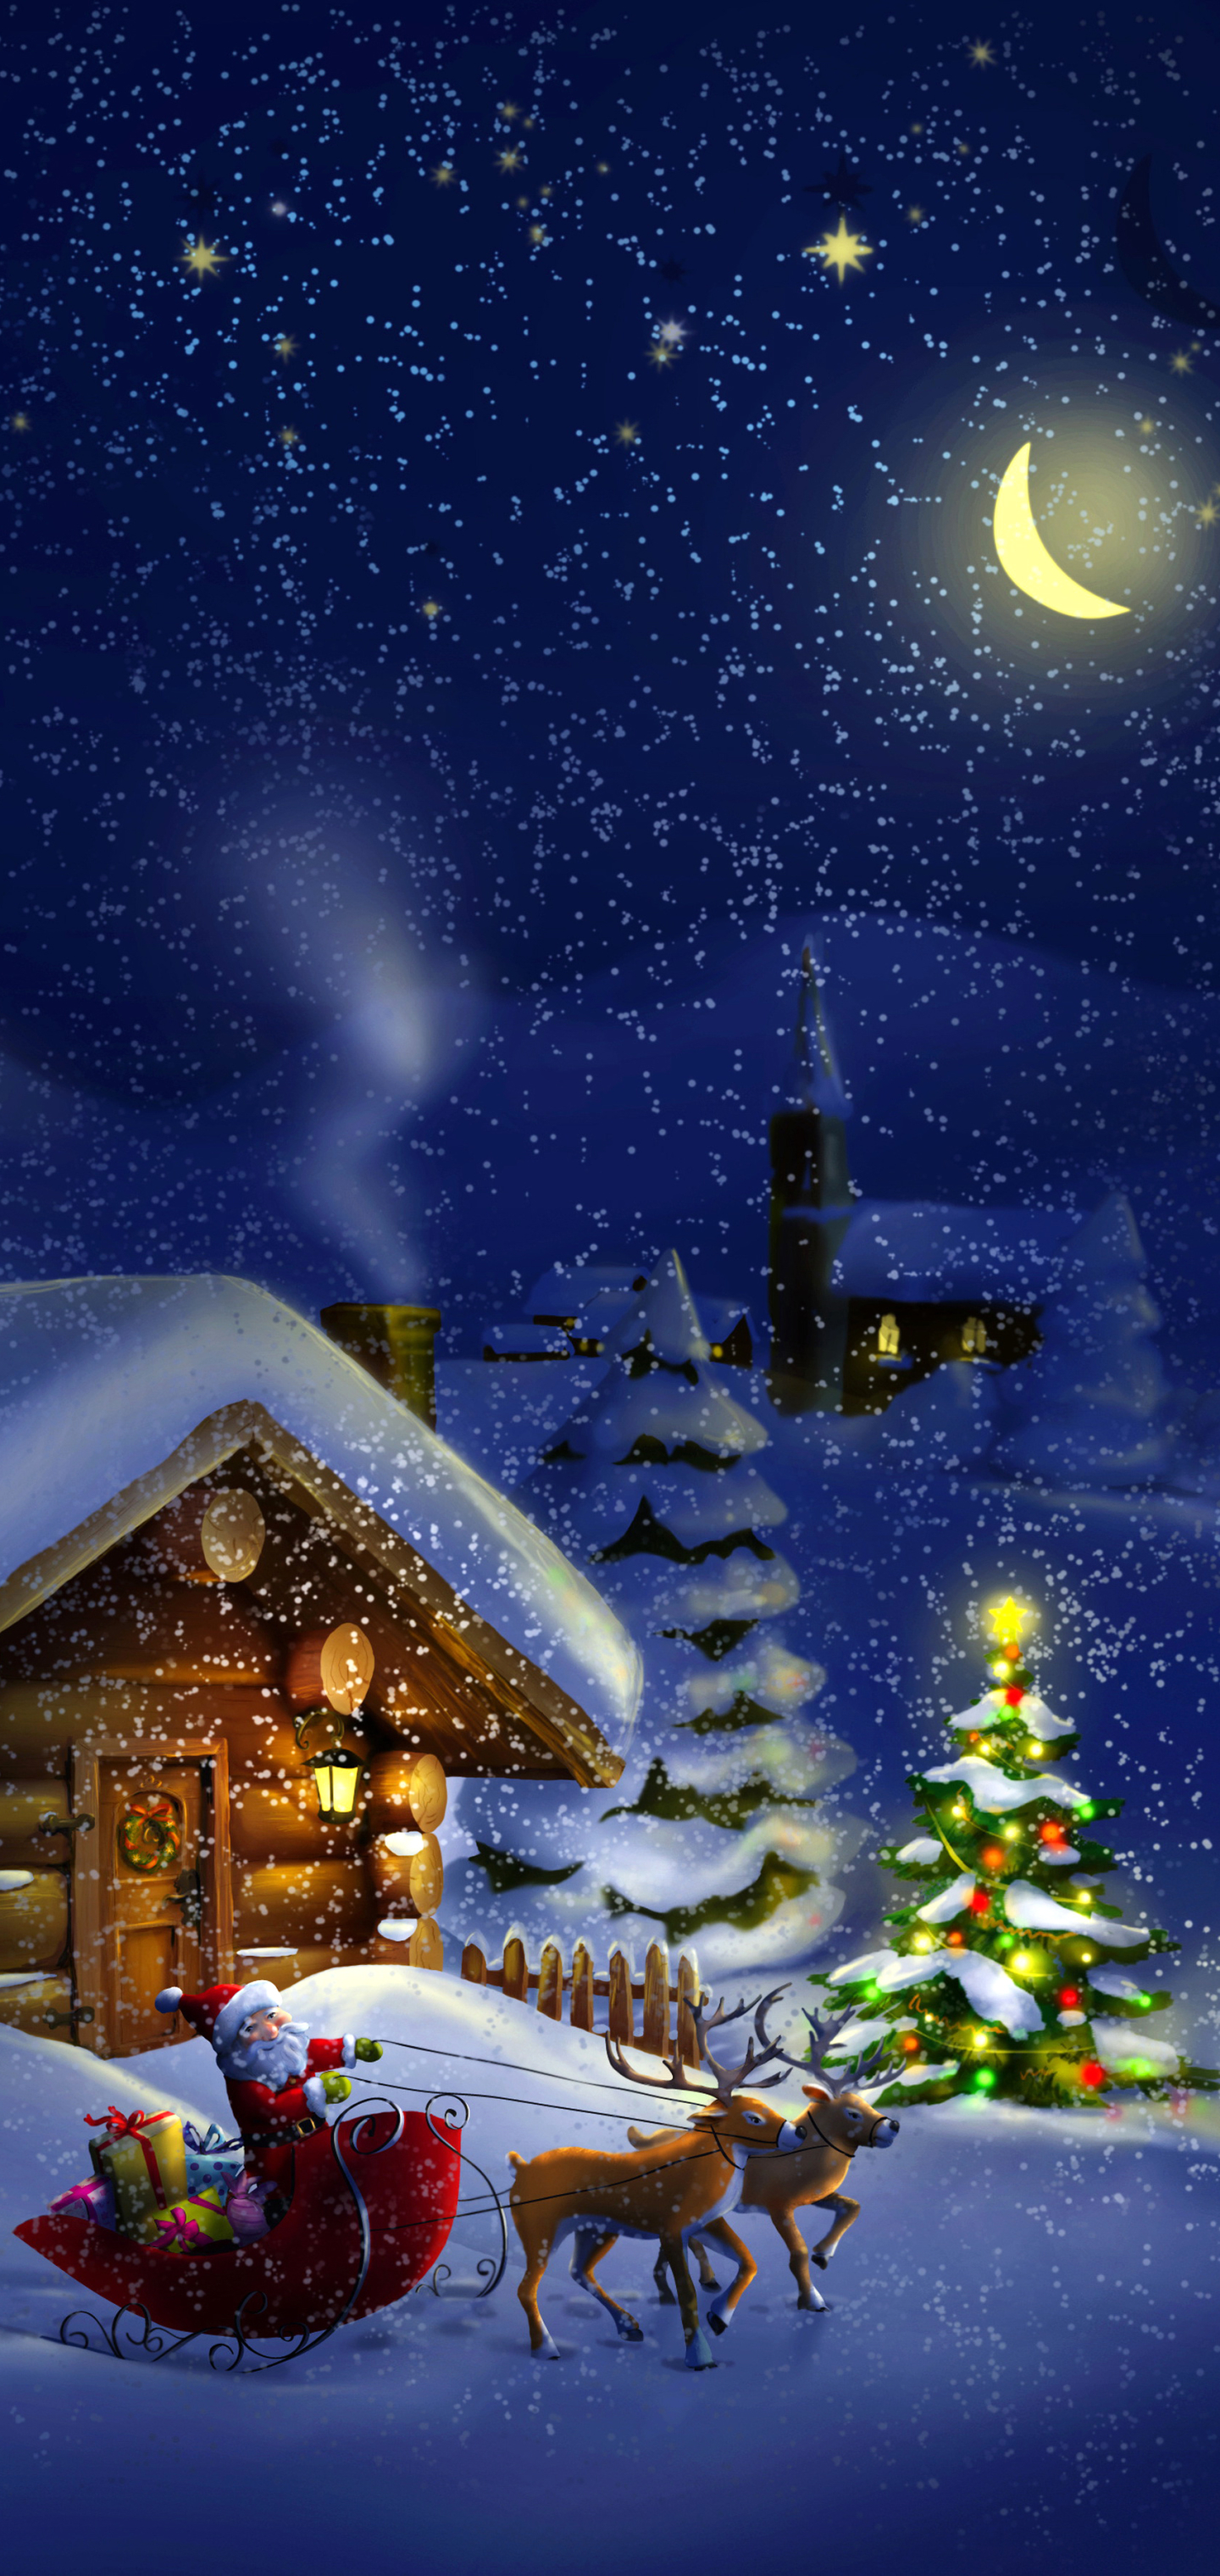 Christmas Cottage Wallpaper 64 pictures